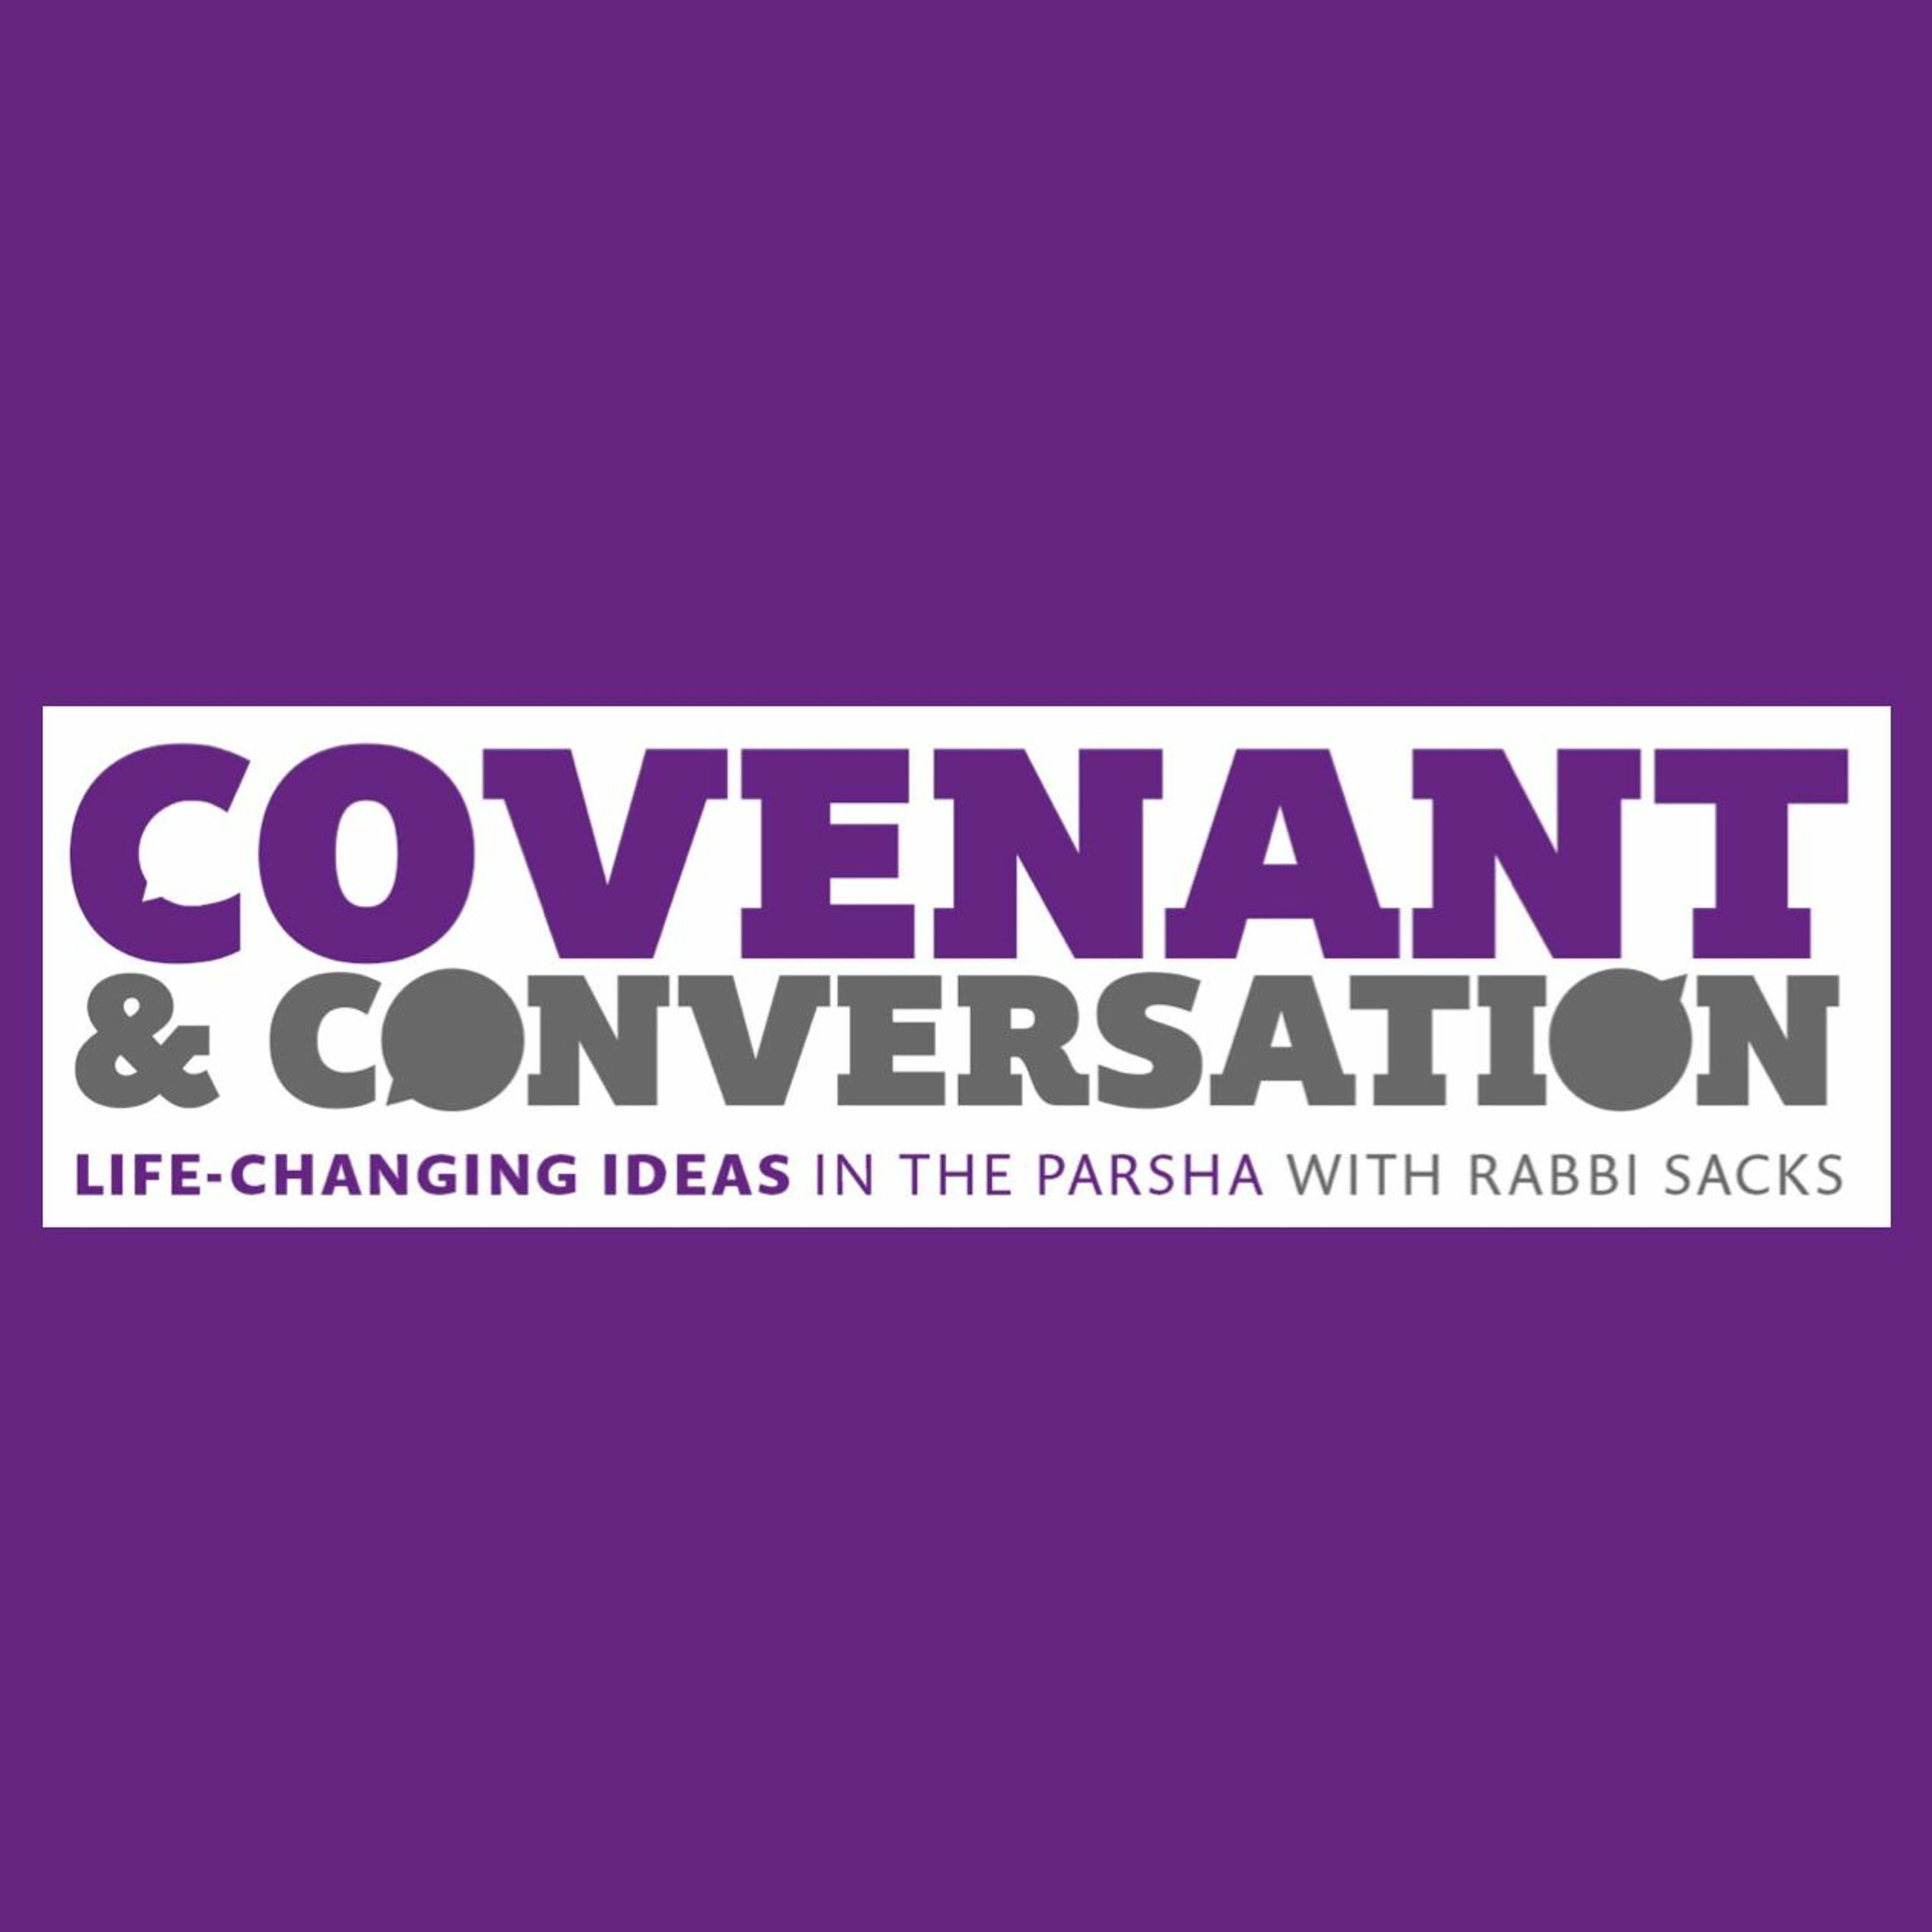 Why Isaac? Why Jacob? | Toldot, Covenant & Conversation 5778